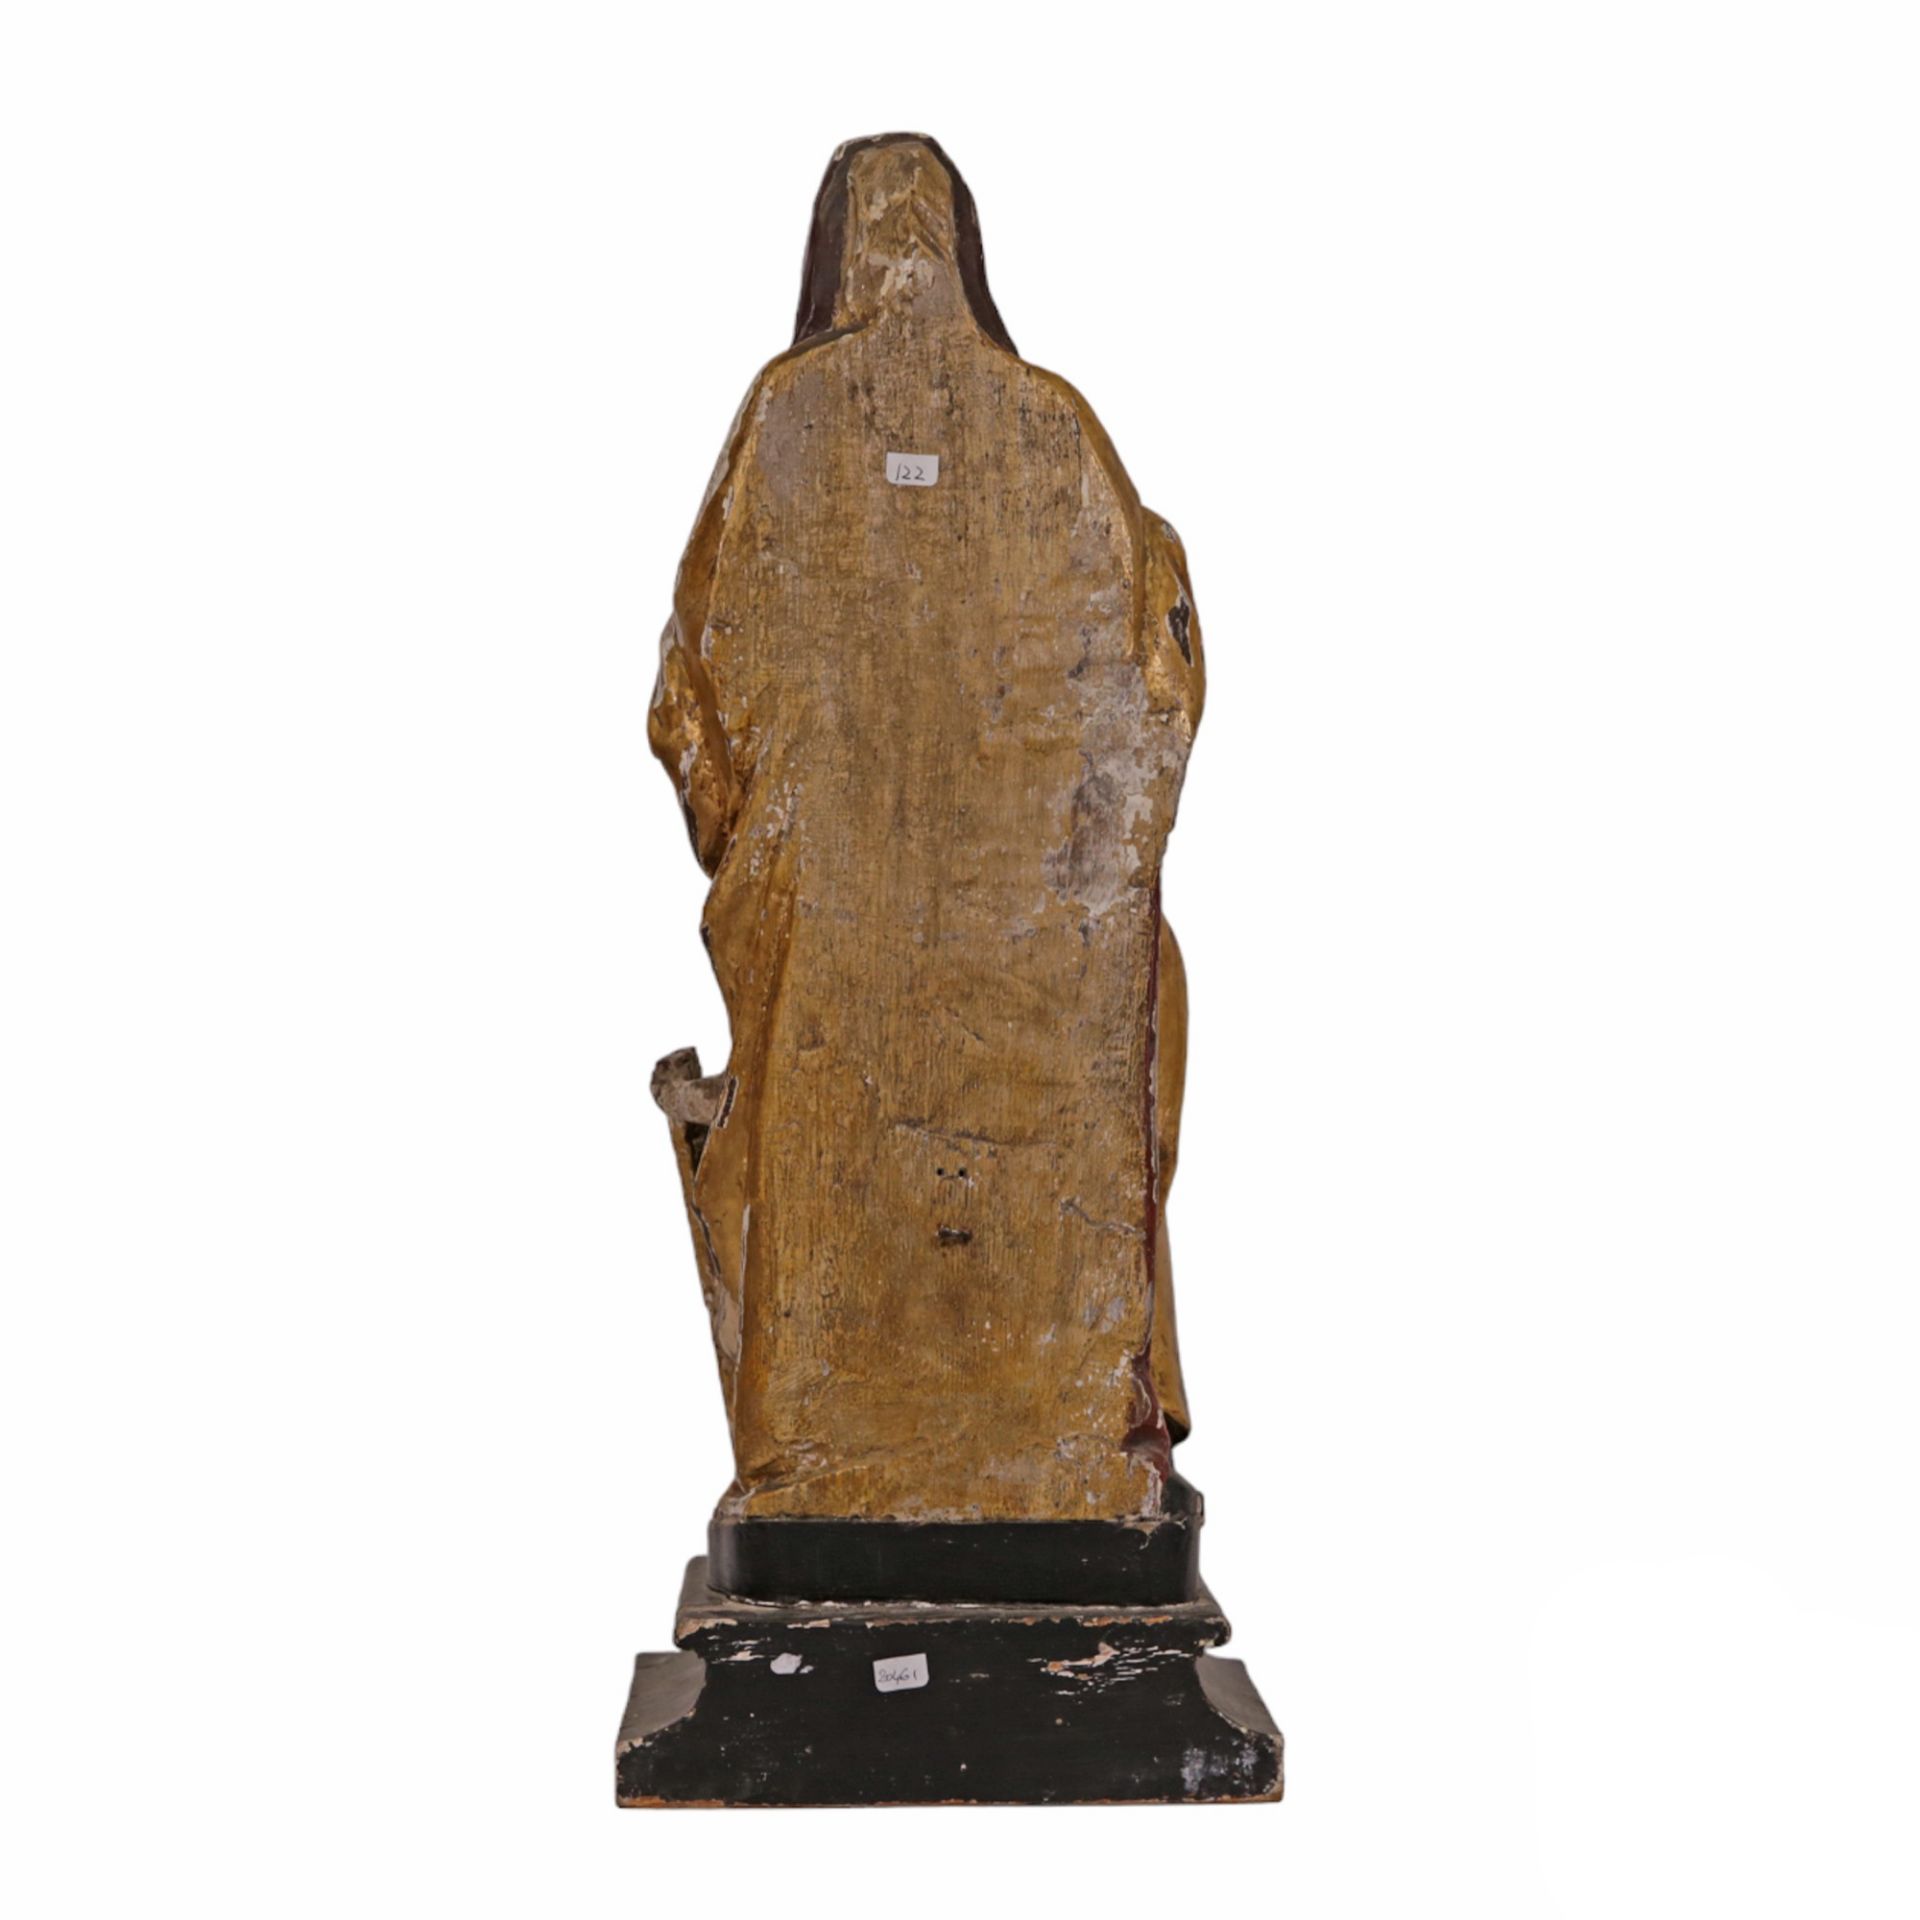 RARE, ANTIQUE, POLYCHROME WOODEN SCULPTURE "SAINT ANNE TRINITI", ON THE BASIS. FRANCE 19th CENTURY. - Image 7 of 13